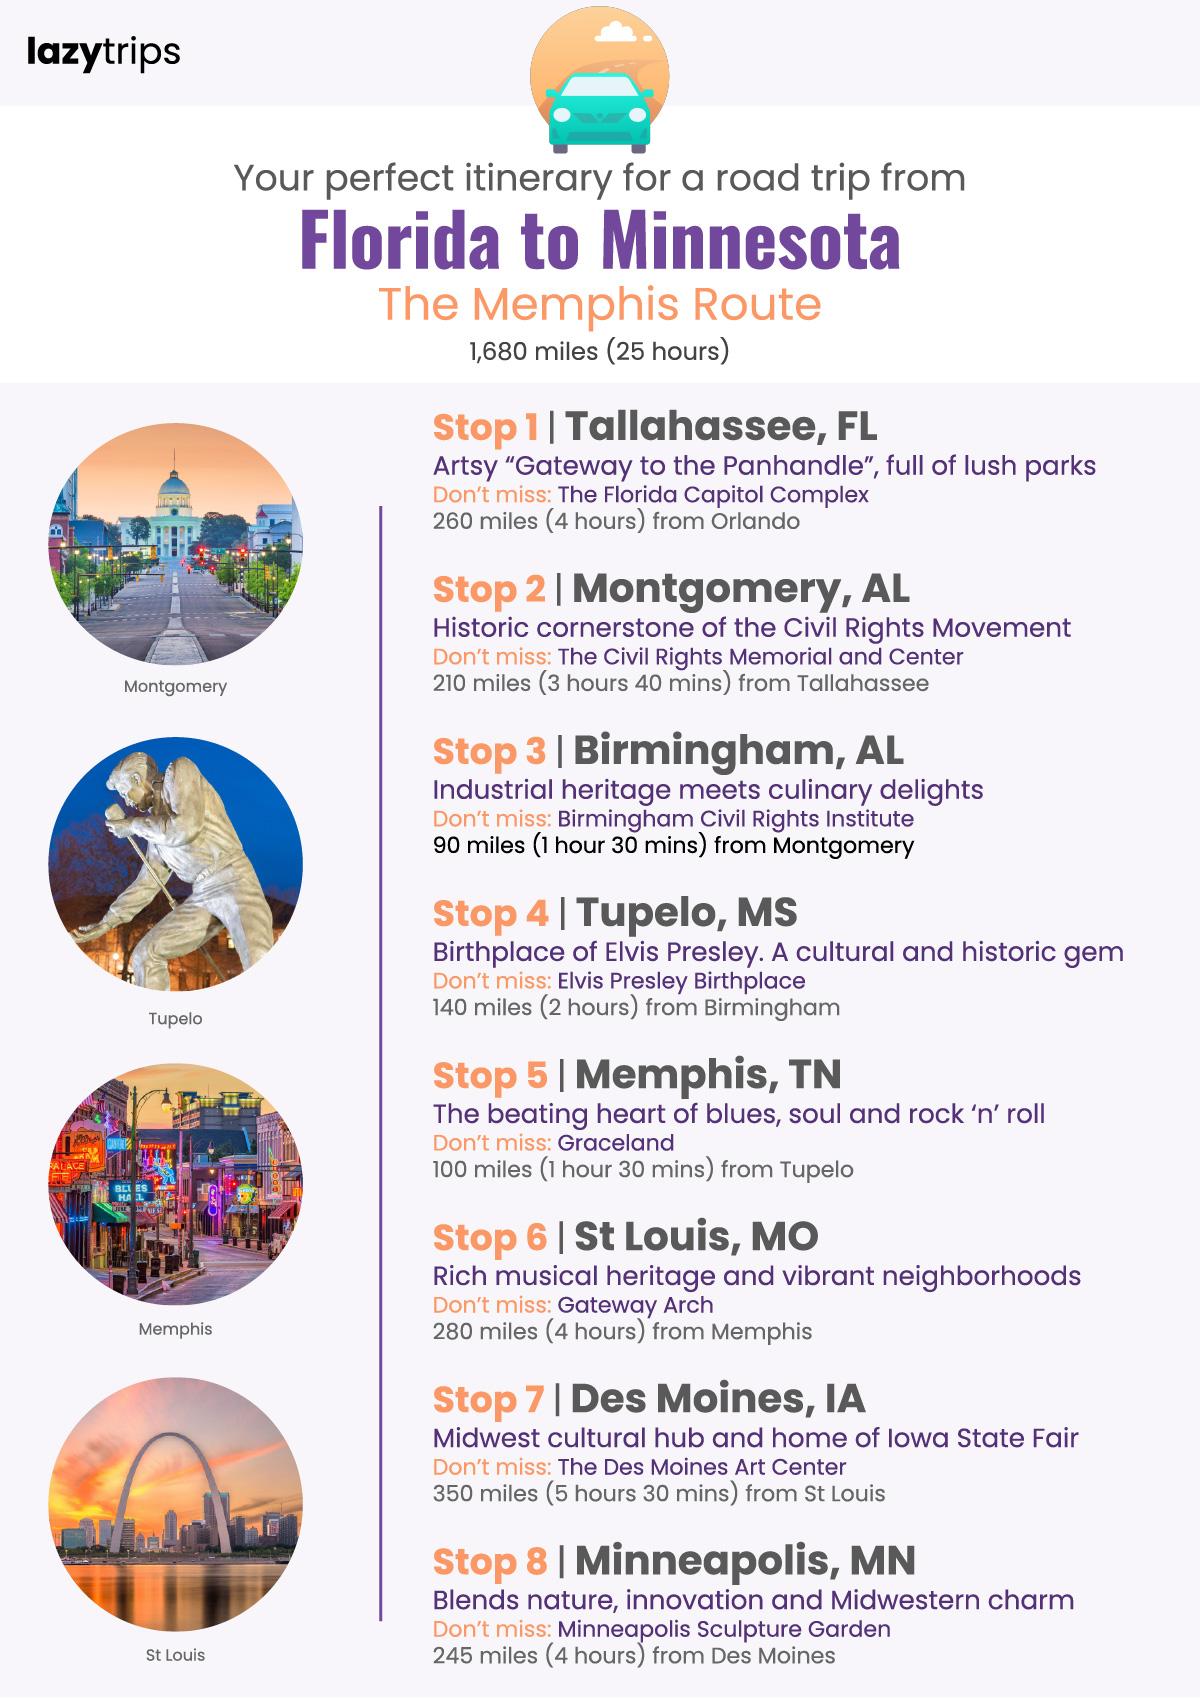 Itinerary for a road trip from Florida to Minnesota, showing via points: Tallahassee, Montgomery, Birmingham, Tupelo, Memphis, St Louis, Des Moines and Minneapolis